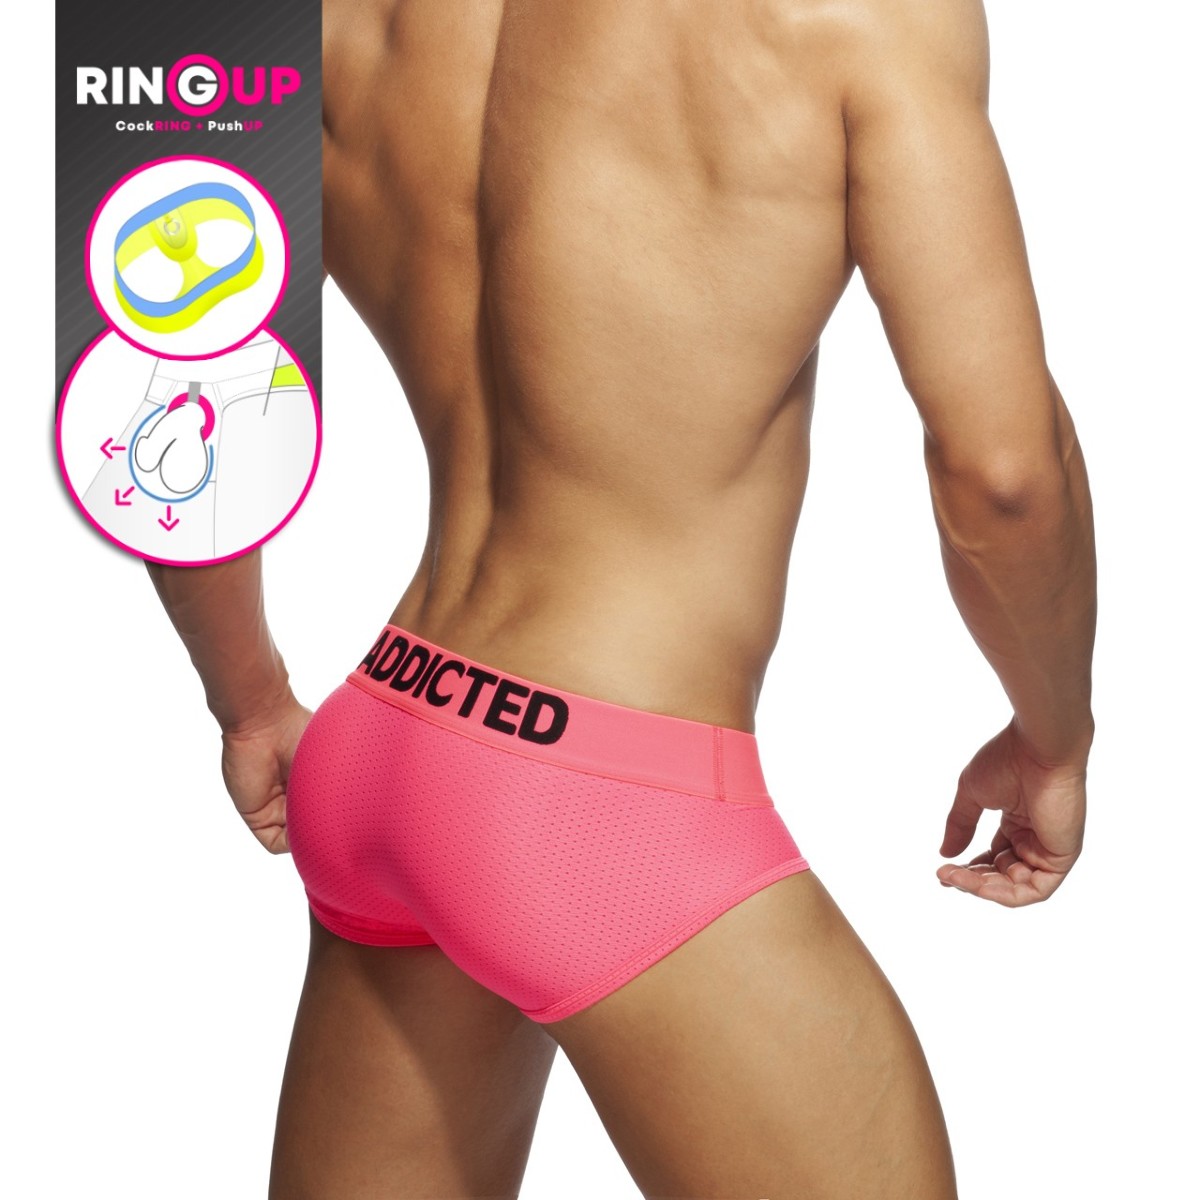 AD Ring up Neon Mesh Brief pink